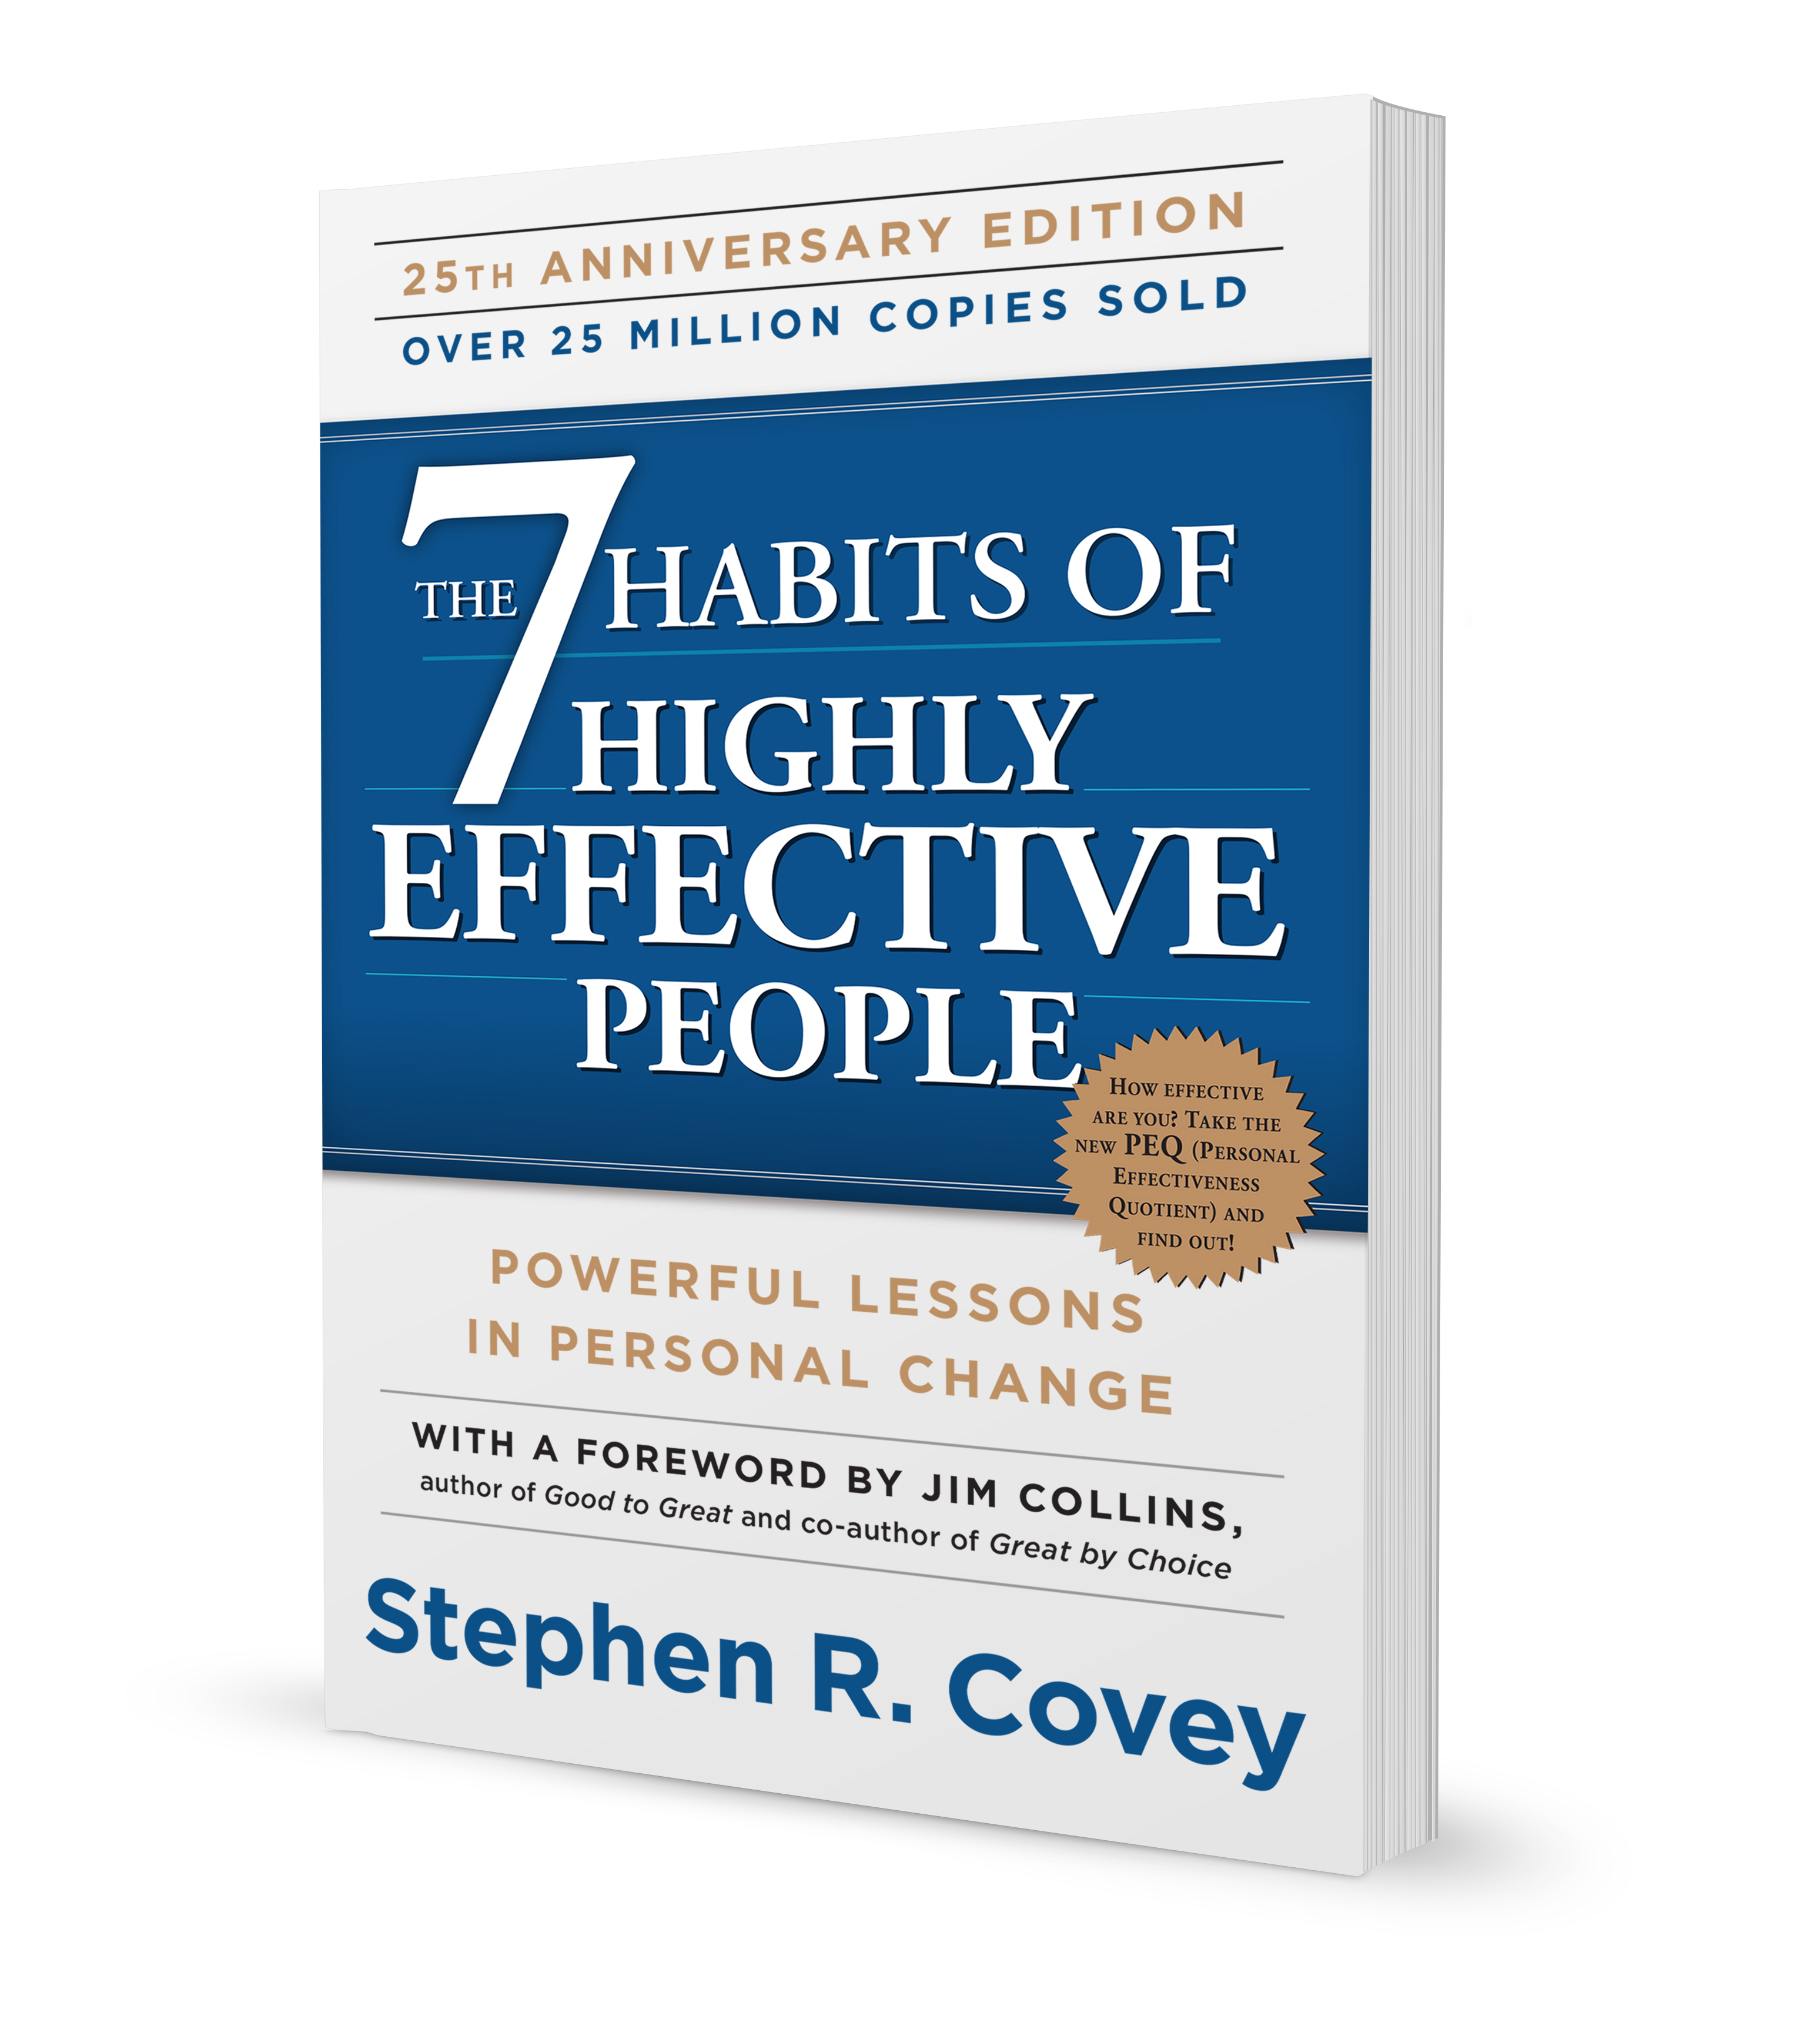 he seven habits of highly effective people